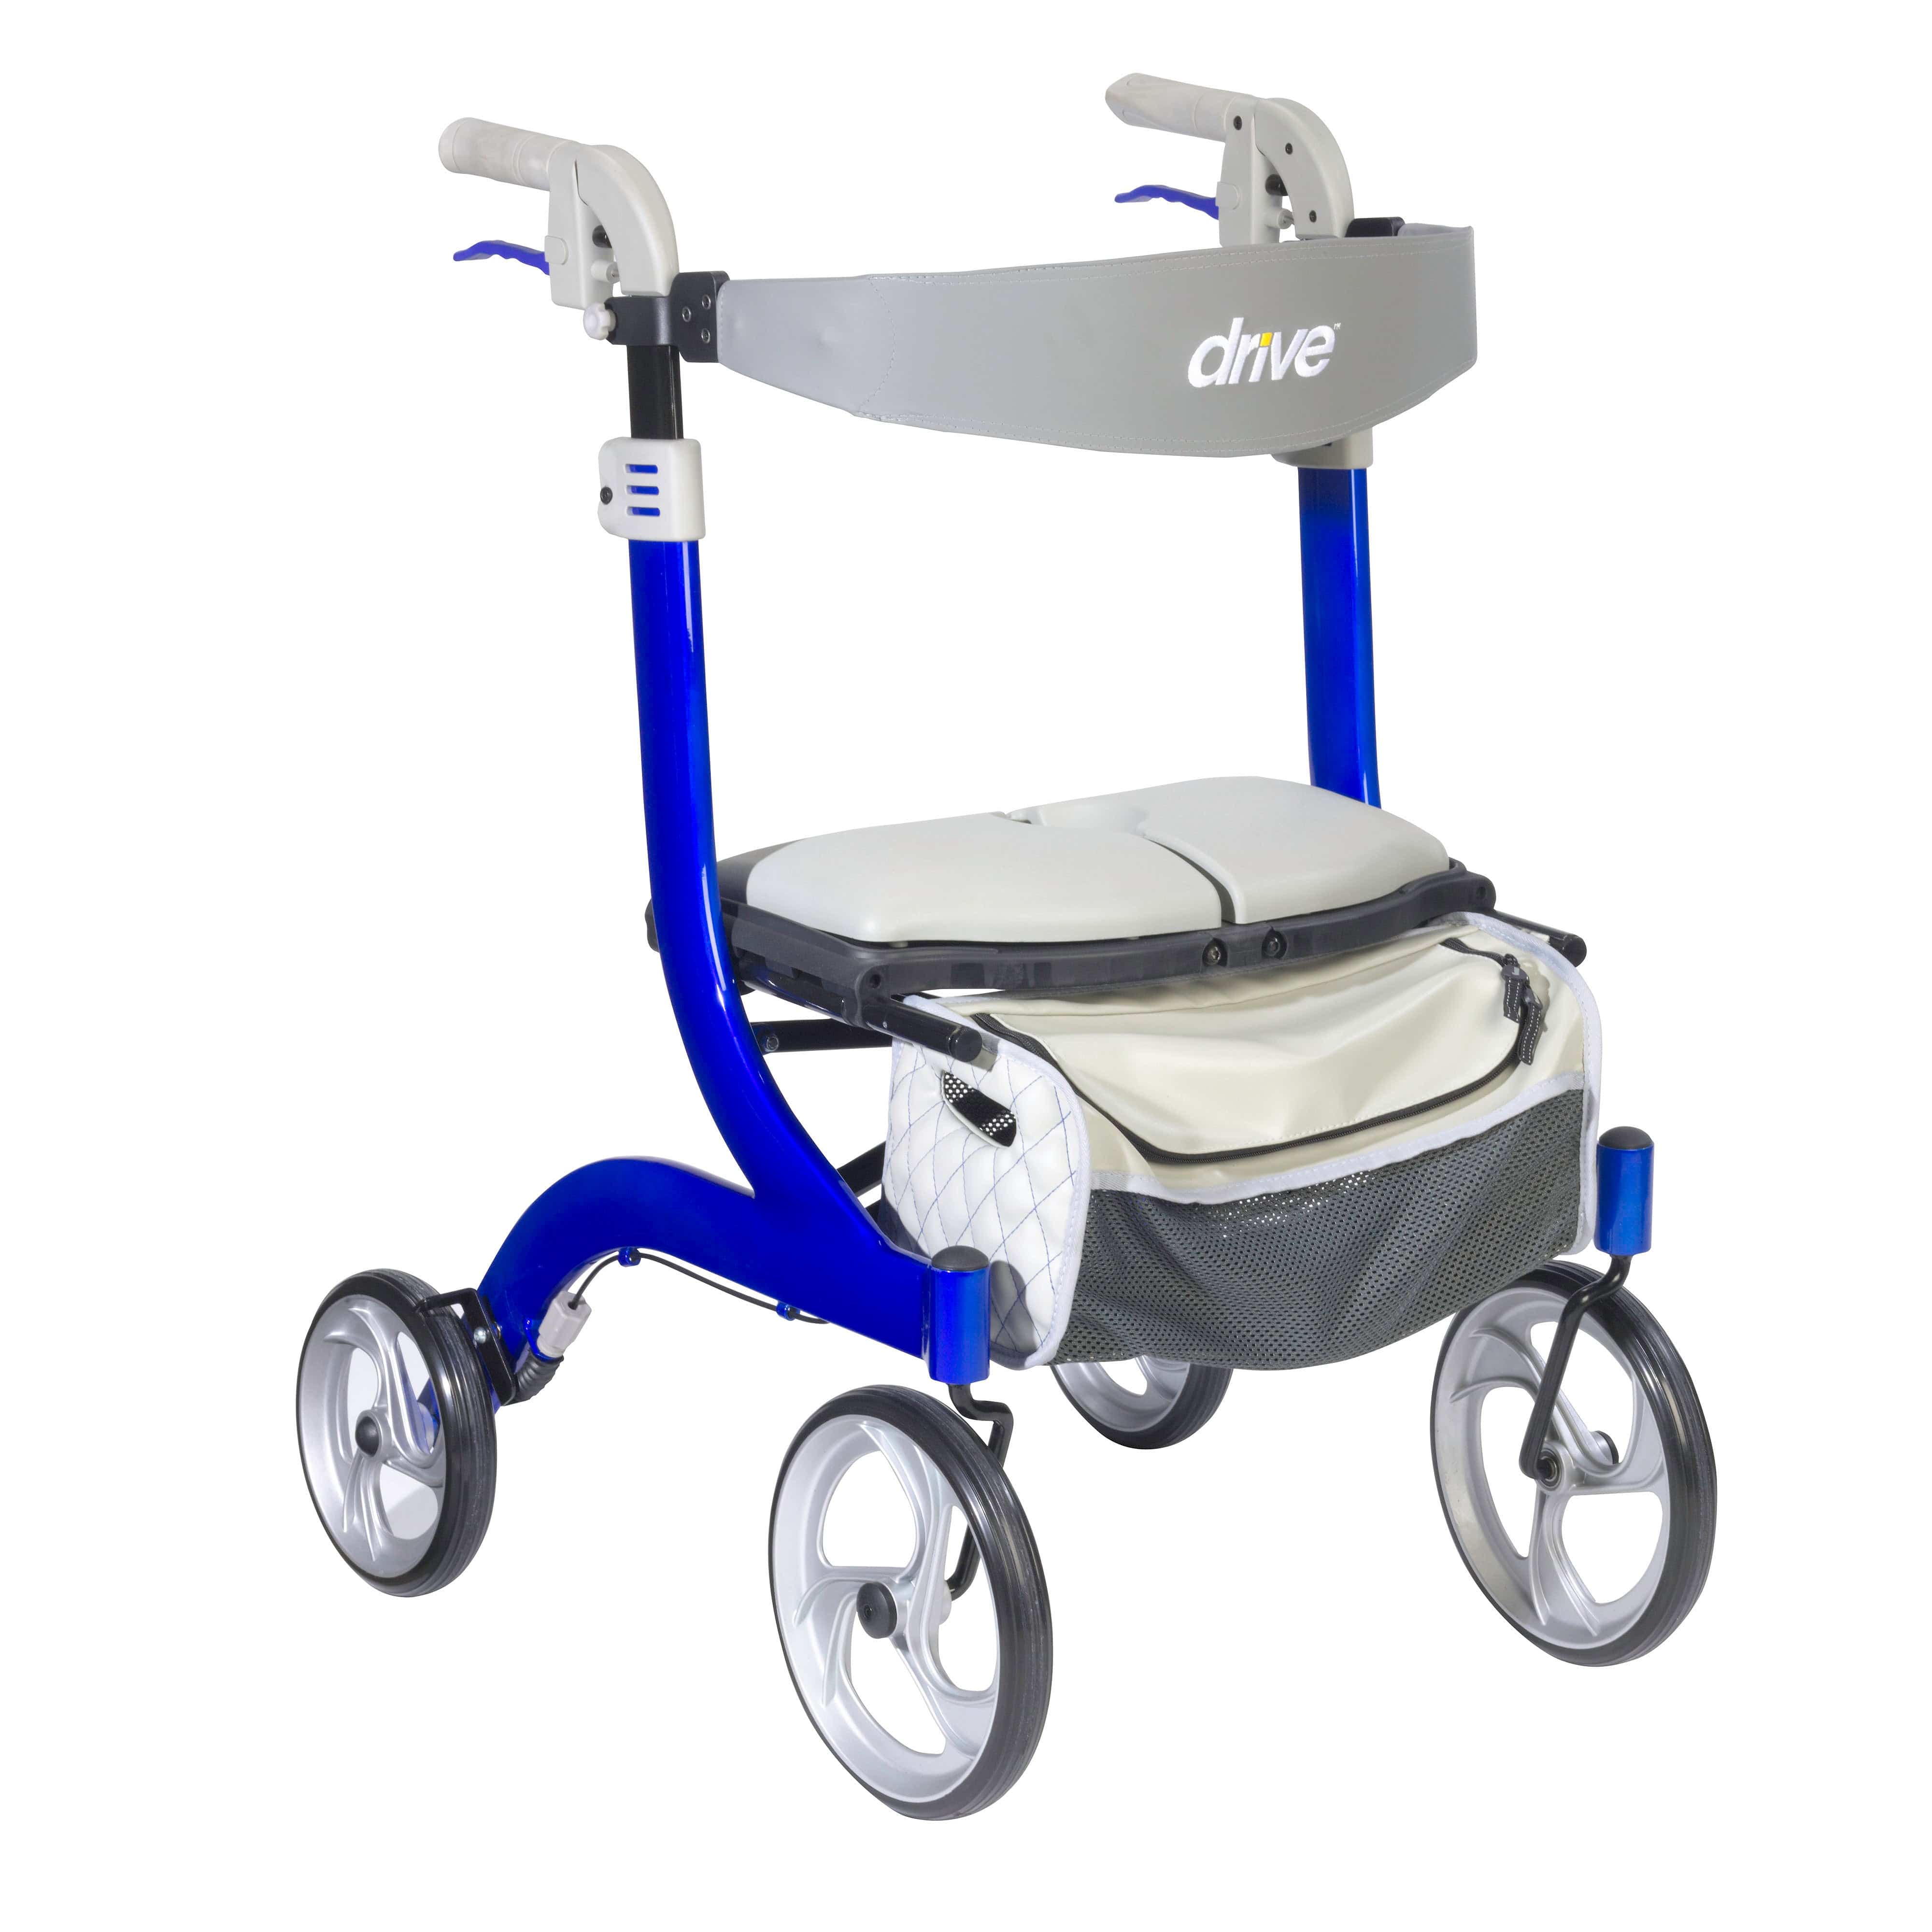 Drive Medical Drive Medical Nitro DLX Euro Style Rollator Rolling Walker rtl10266bl-hs